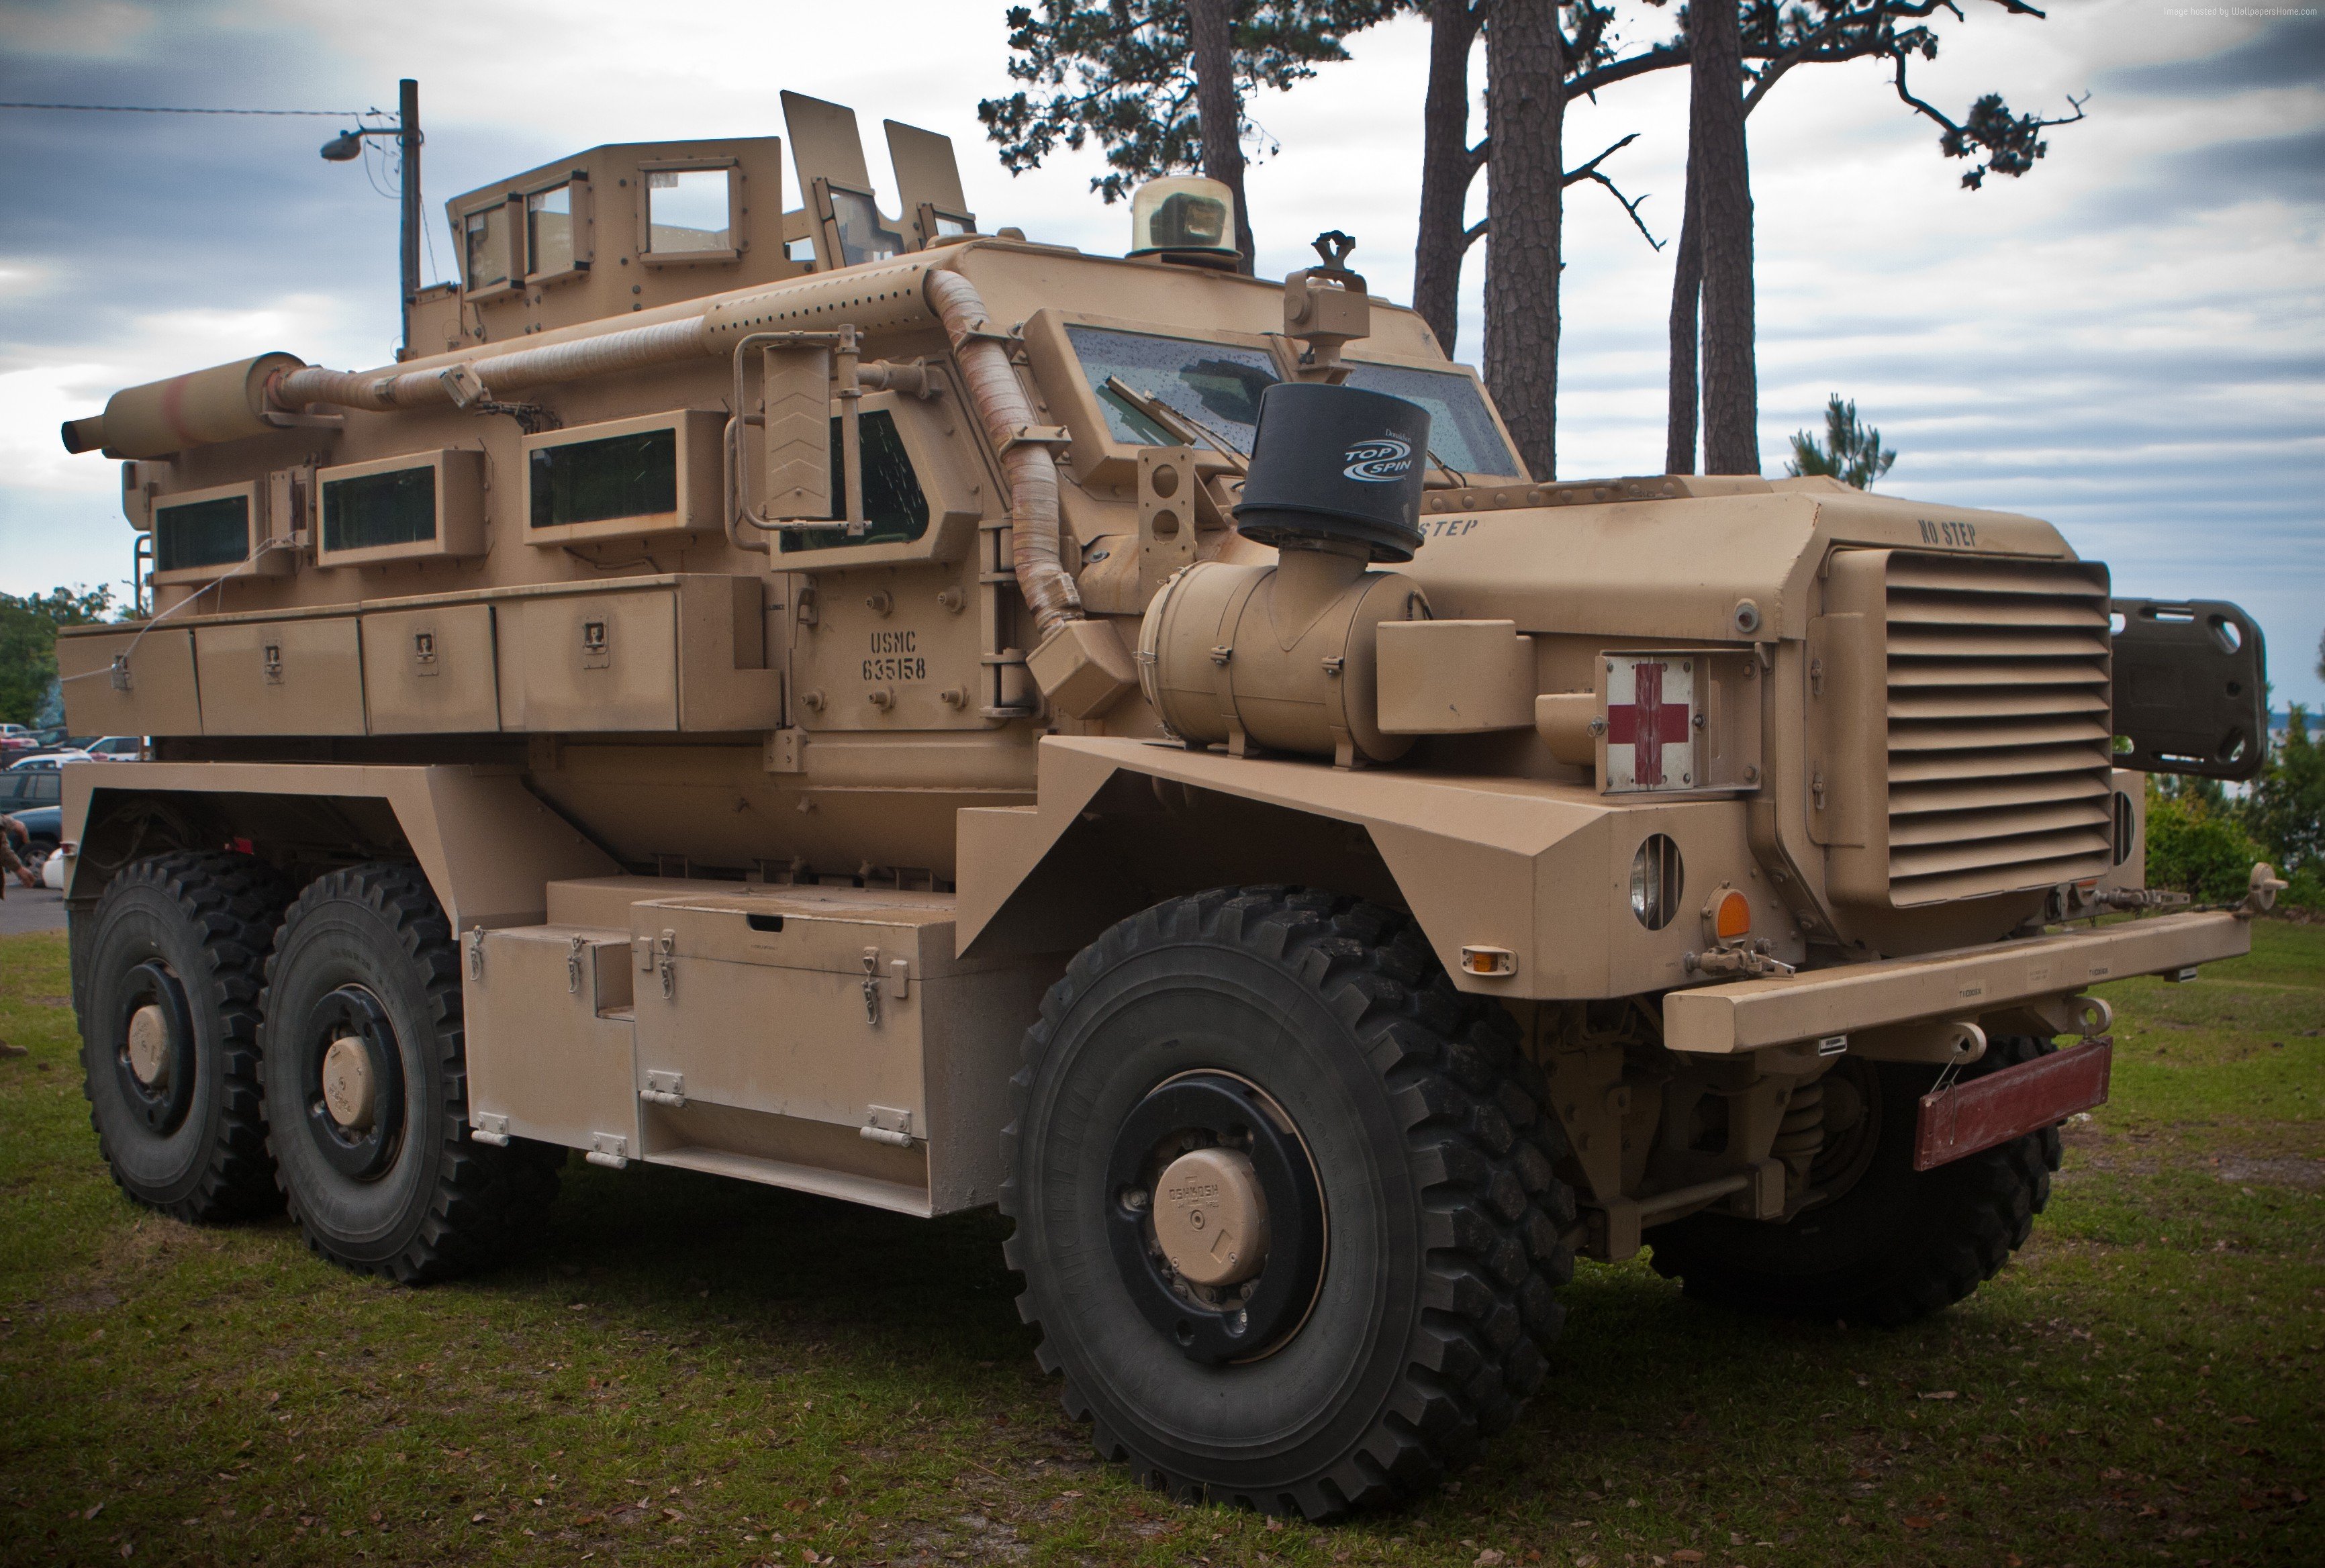 #armoured vehicle, #MRAP, #infantry mobility vehicle, #USMC, #Cougar HE, #Cougar vehicle, #U.S. Army. Mocah HD Wallpaper